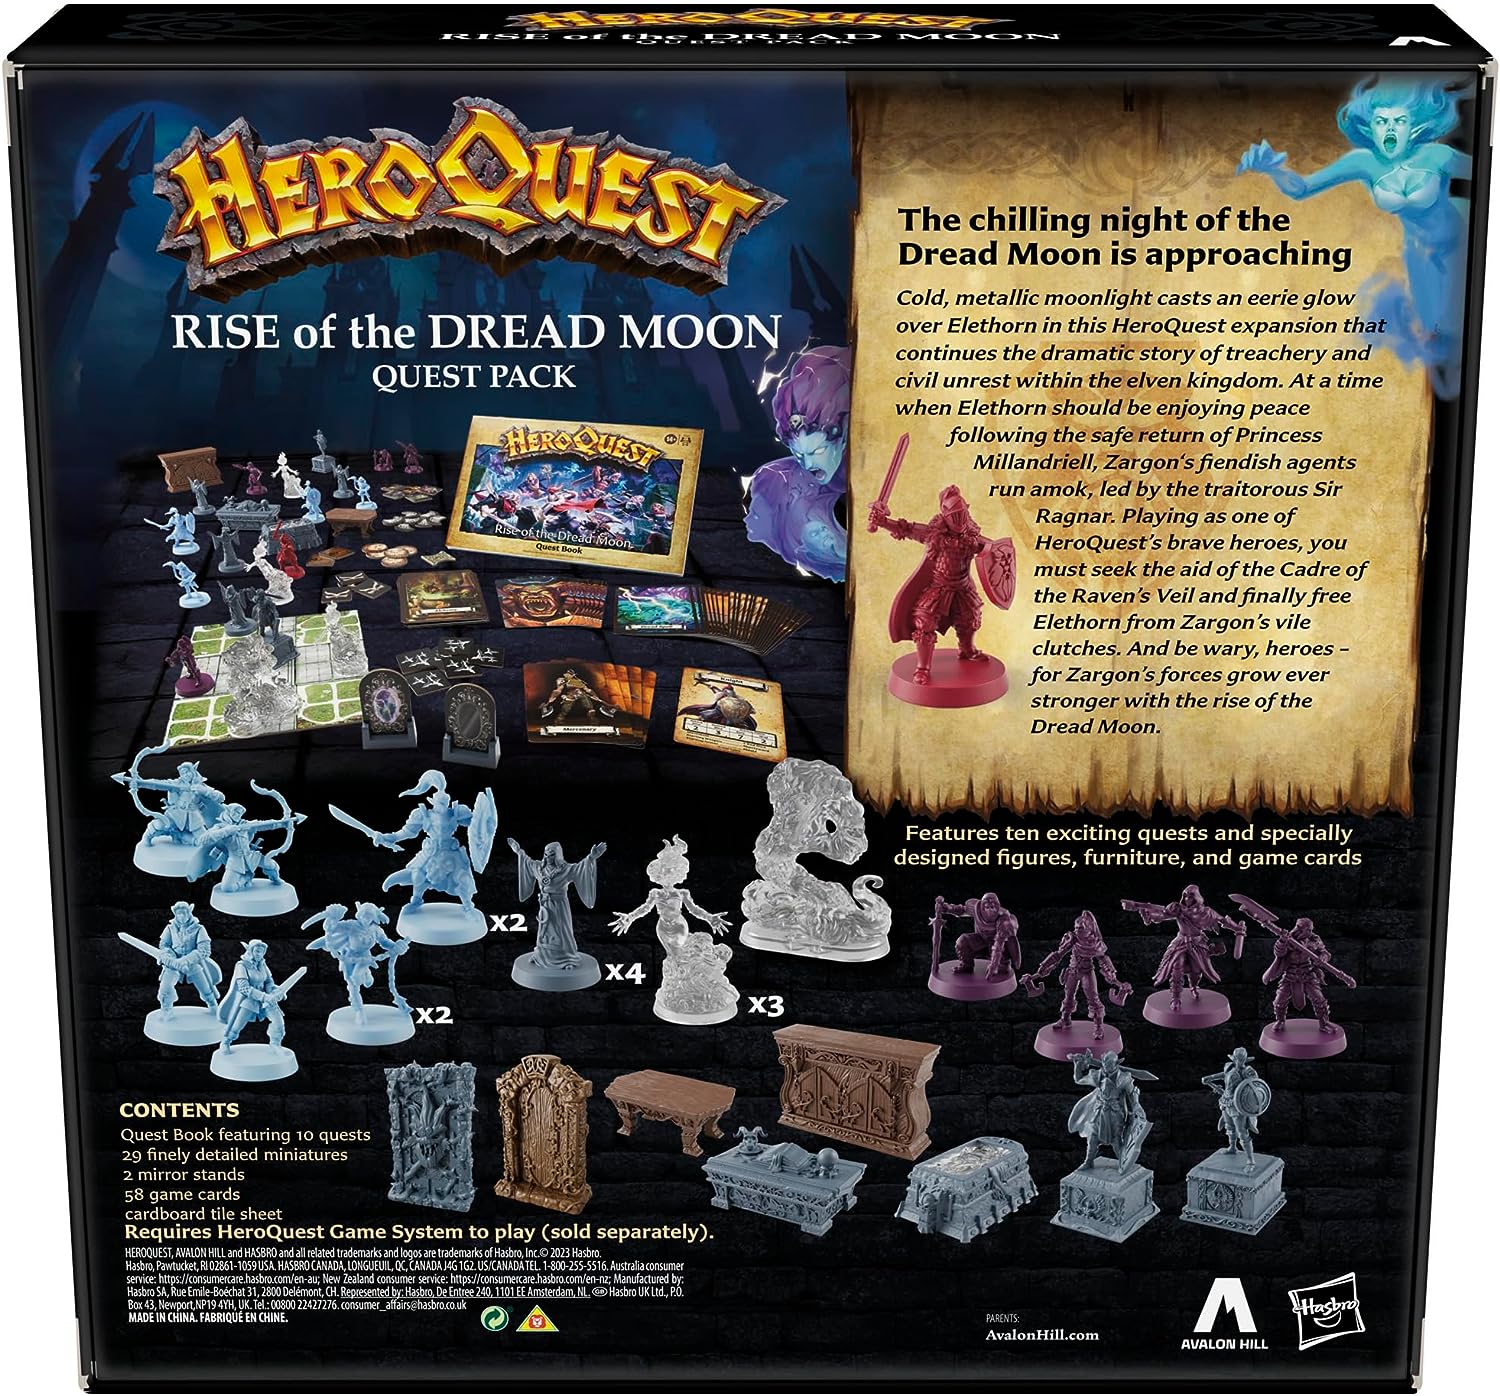 Avalon Hill HeroQuest: Rise of the Dread Moon Quest Pack